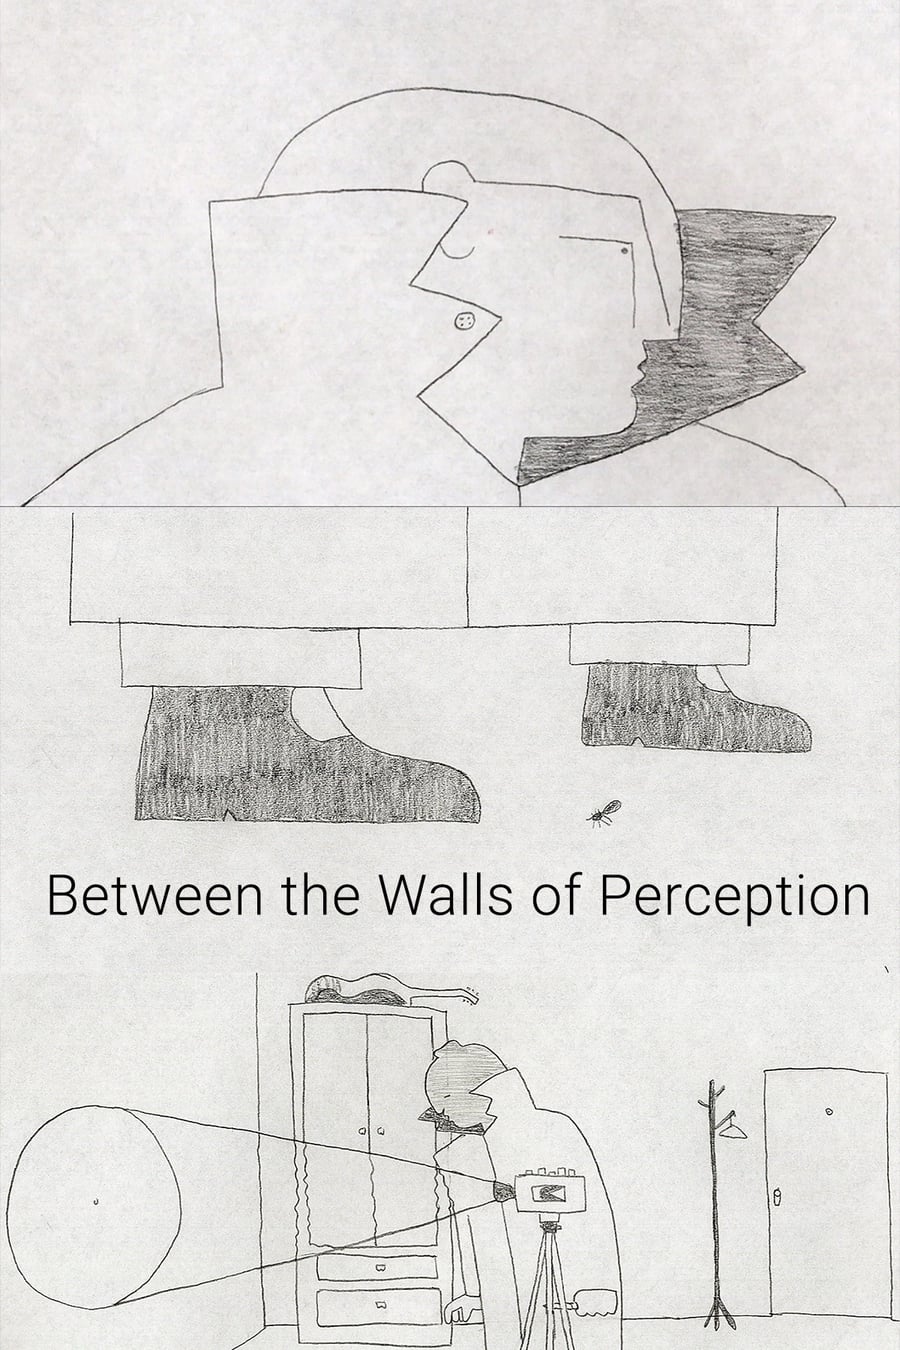 In Between the Walls of Perception